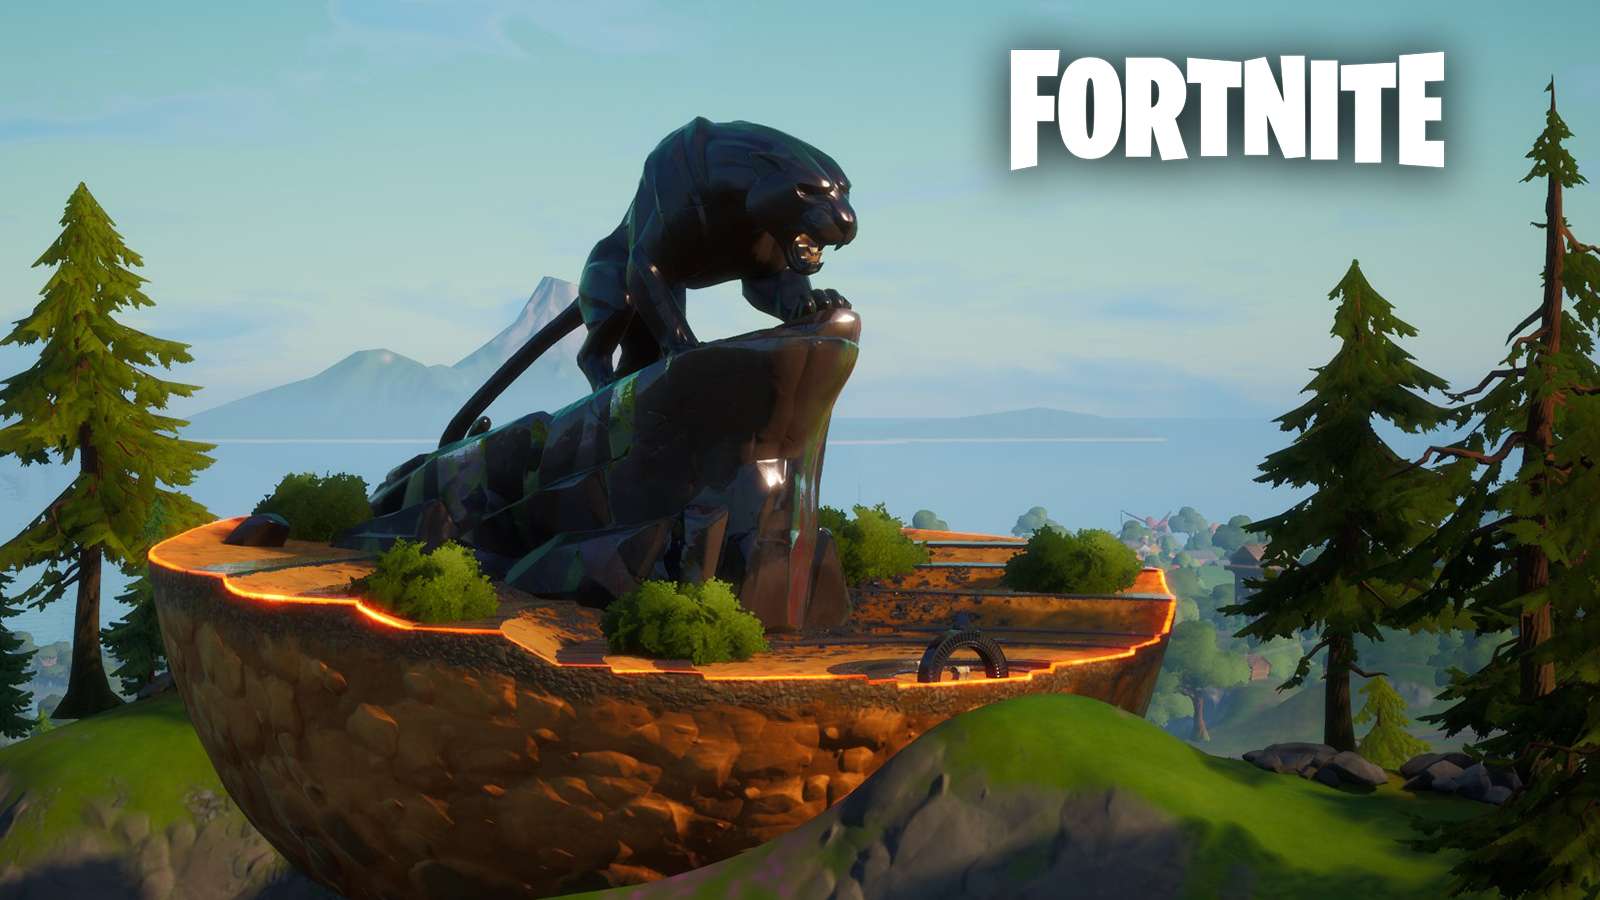 Black Panther statue in Fortnite